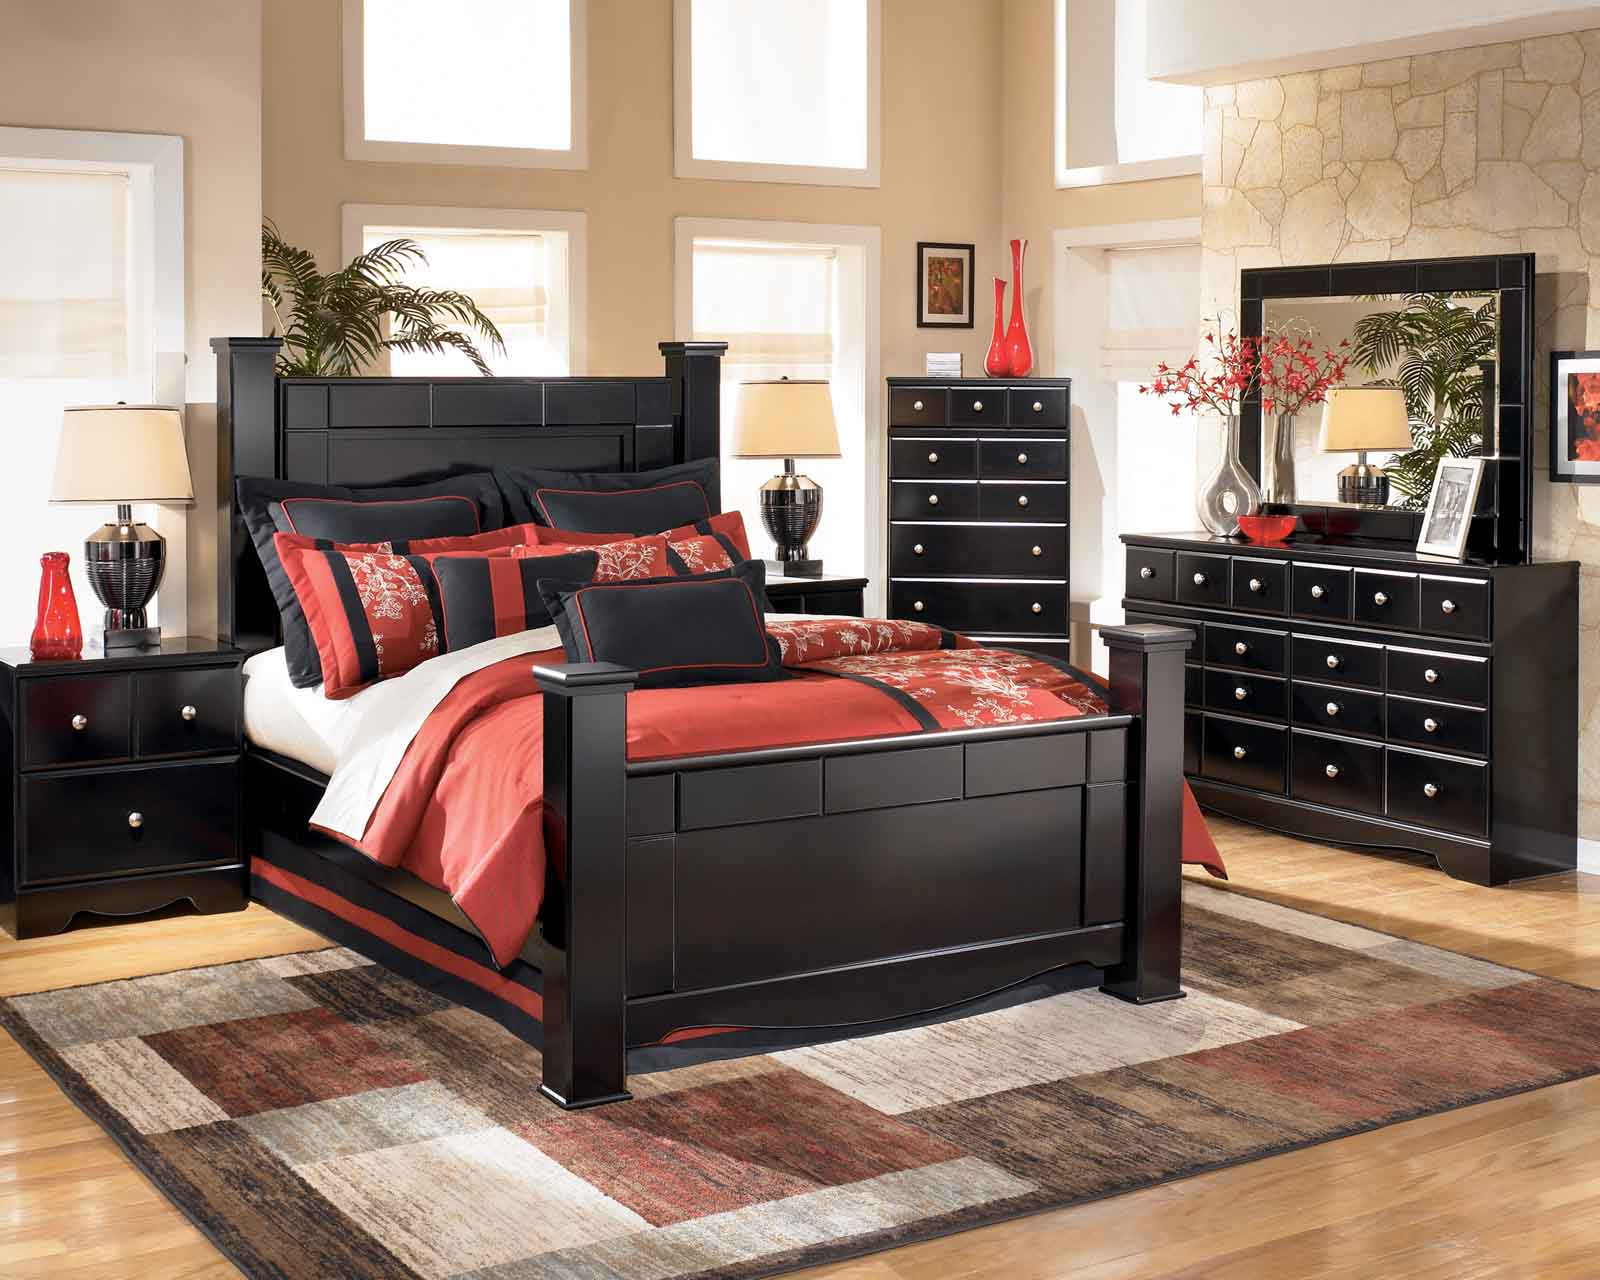 Shay Poster Bedroom Set In Black pertaining to size 1600 X 1280